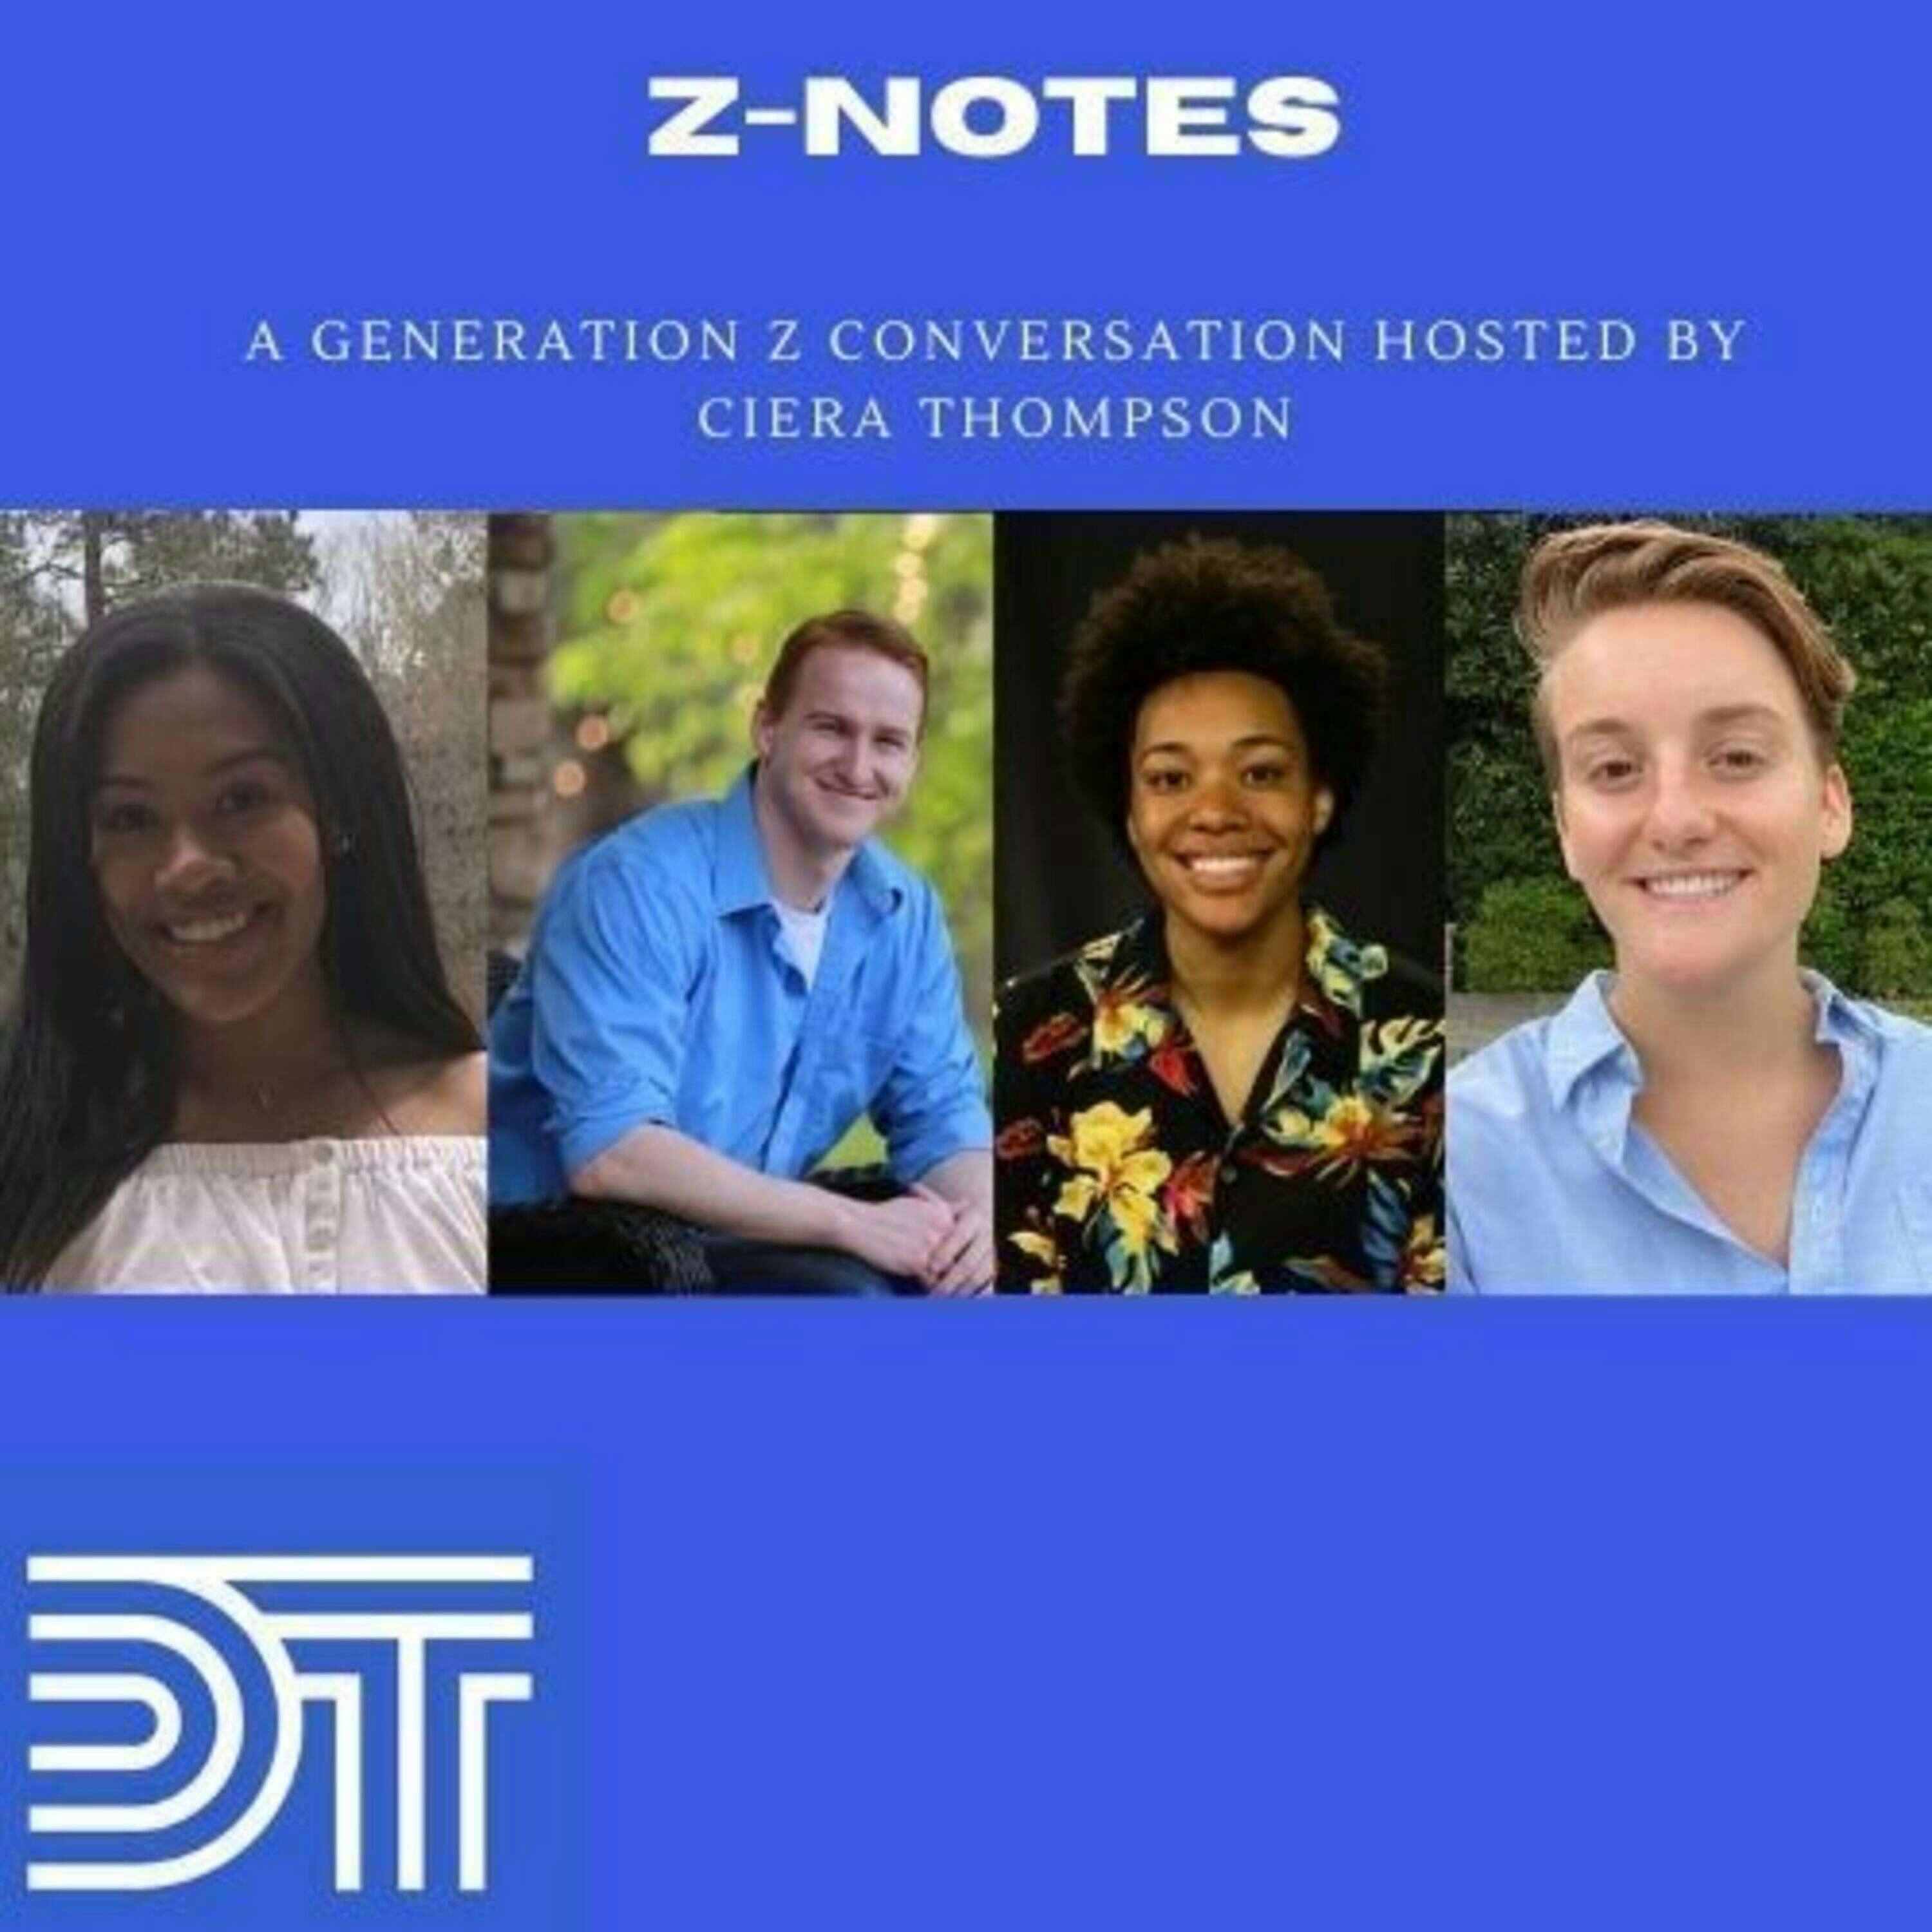 Gen Z Notes with Ciera Thompson, Episode 2: Diana Garland, Cassidy Leovic, and Taylor Oleson